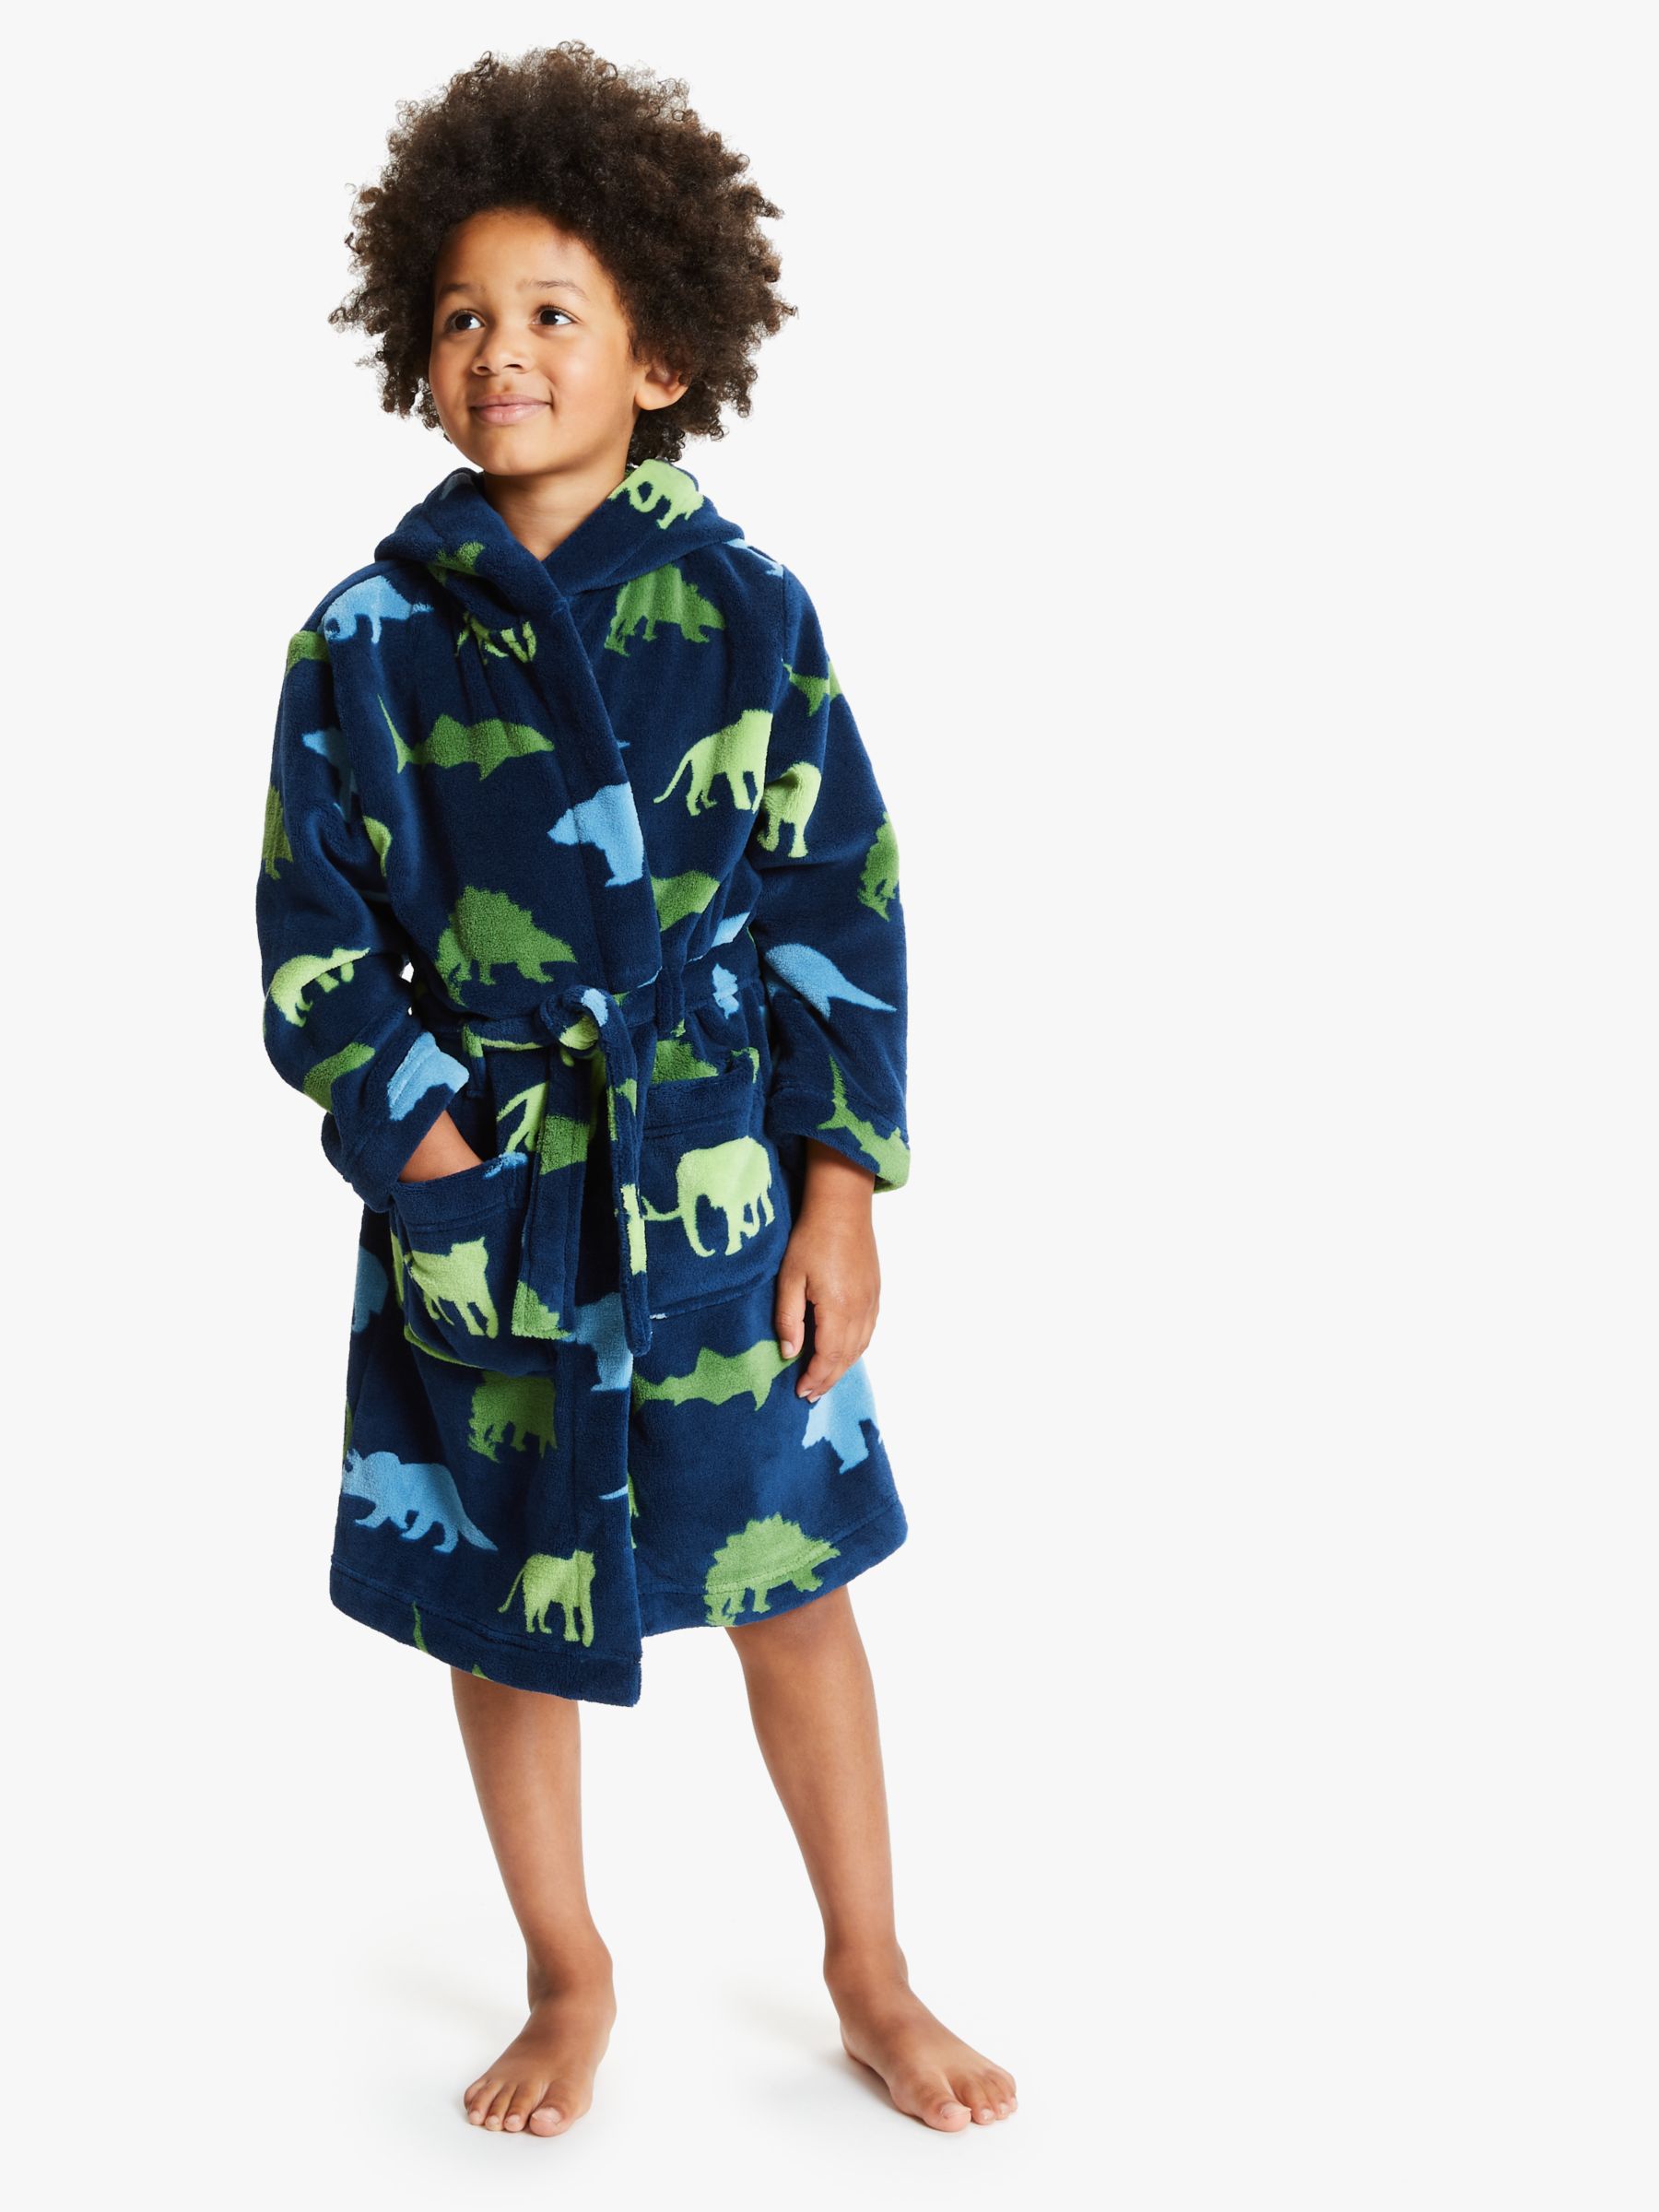 boys navy dressing gown